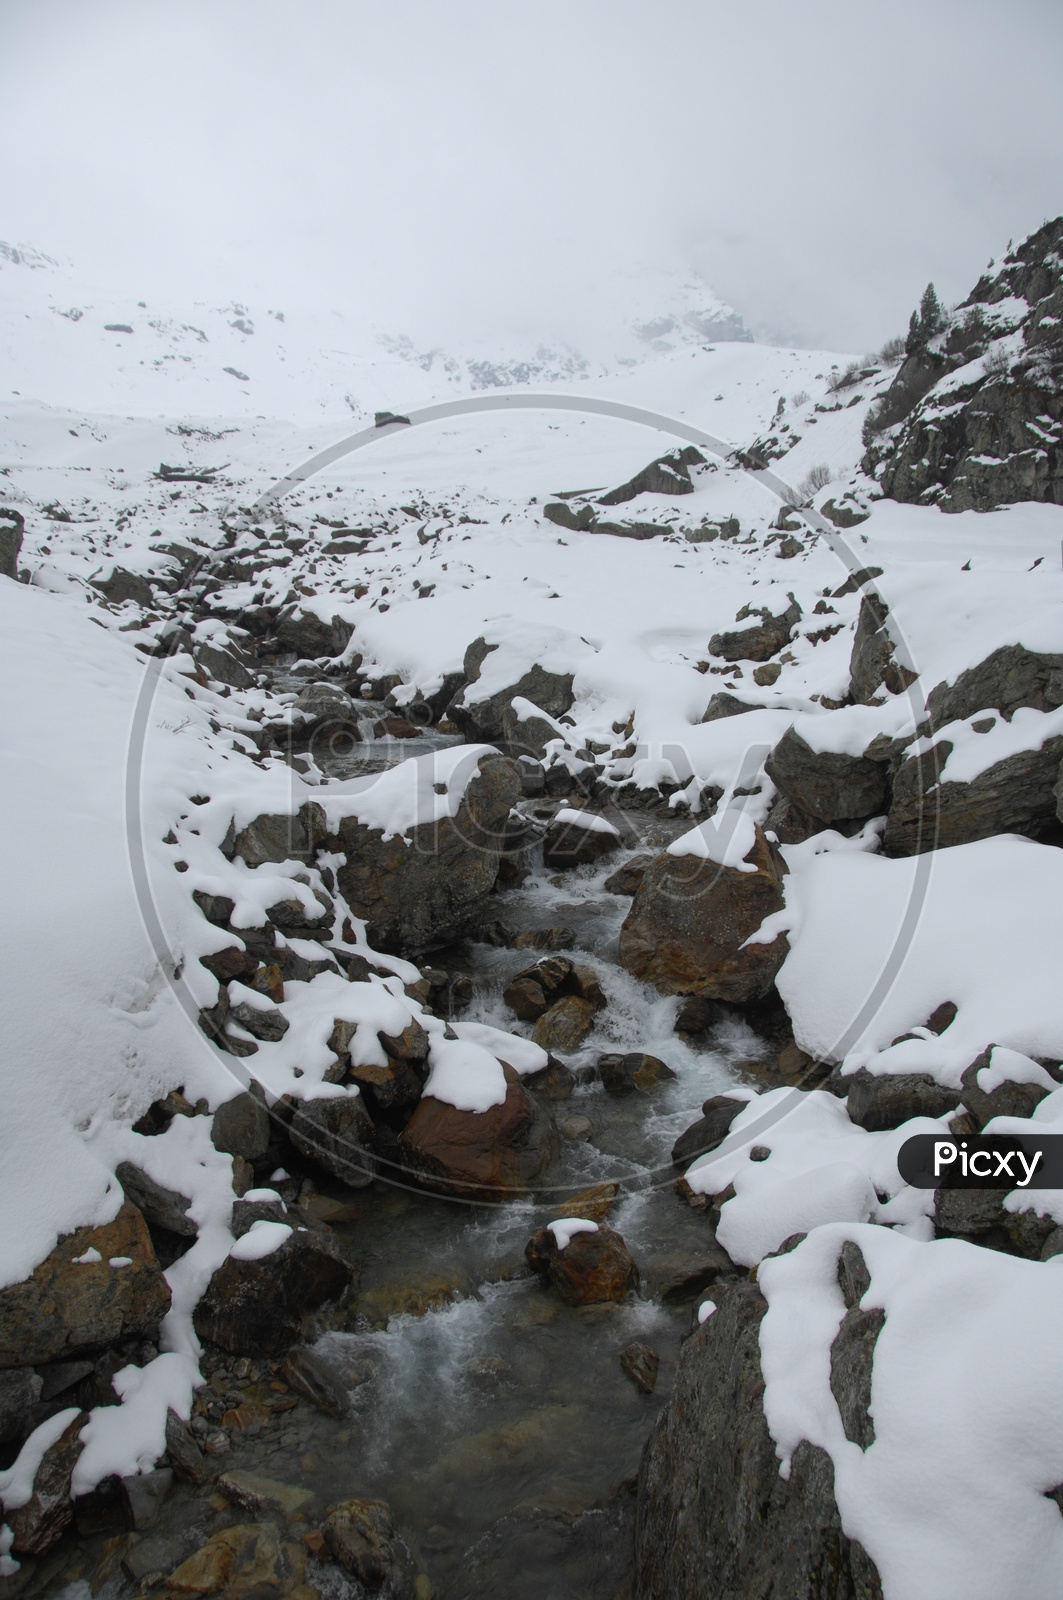 Water stream along the rocks covered with snow